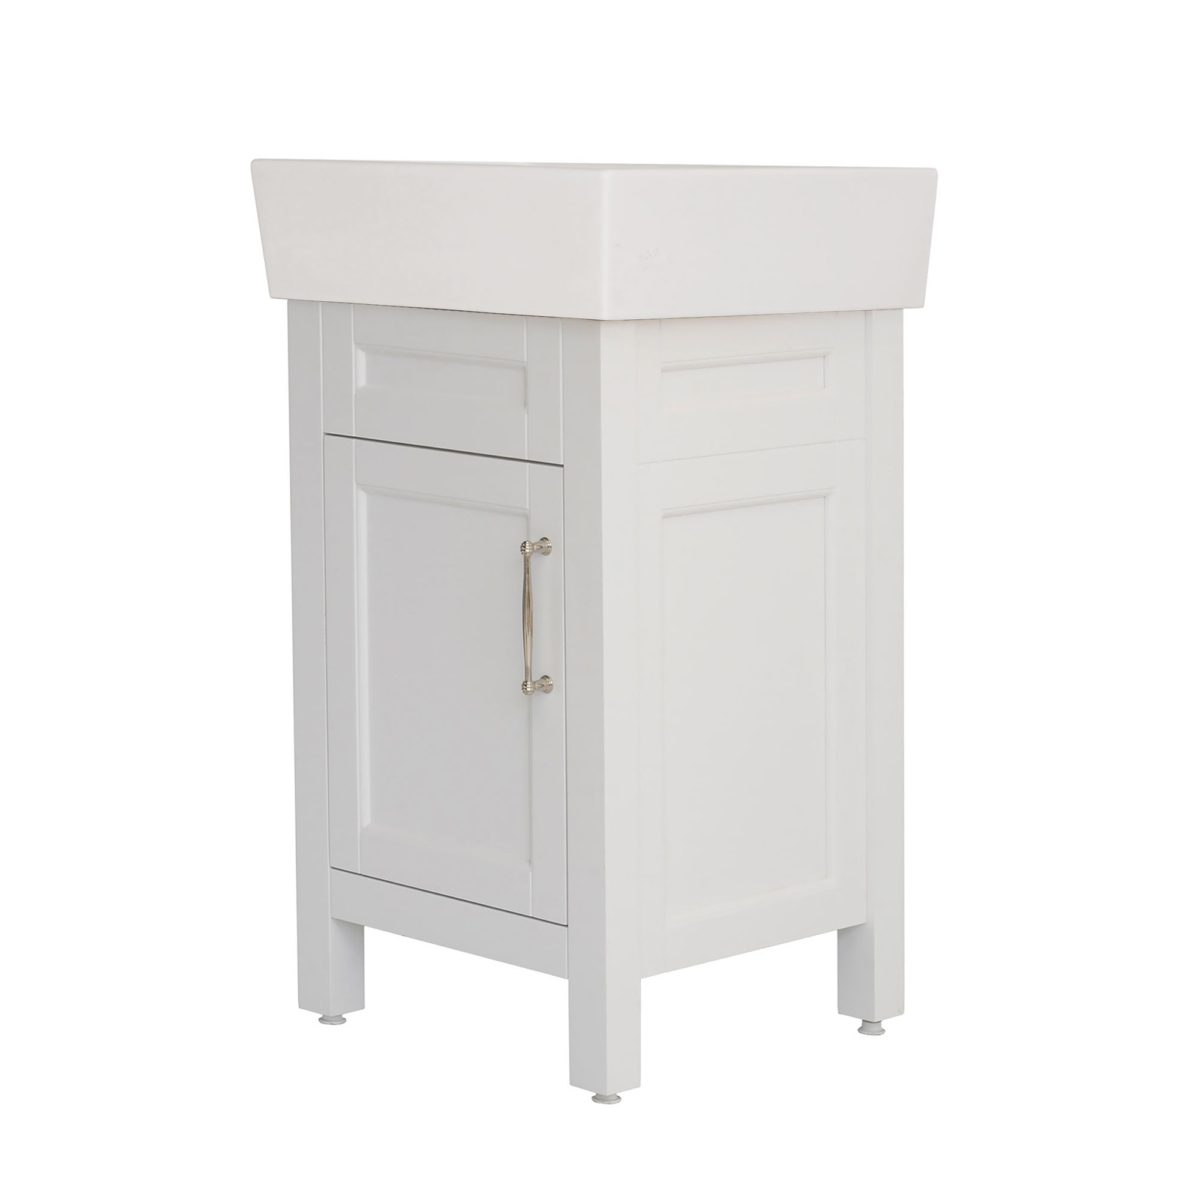 18 inch white vanity side a